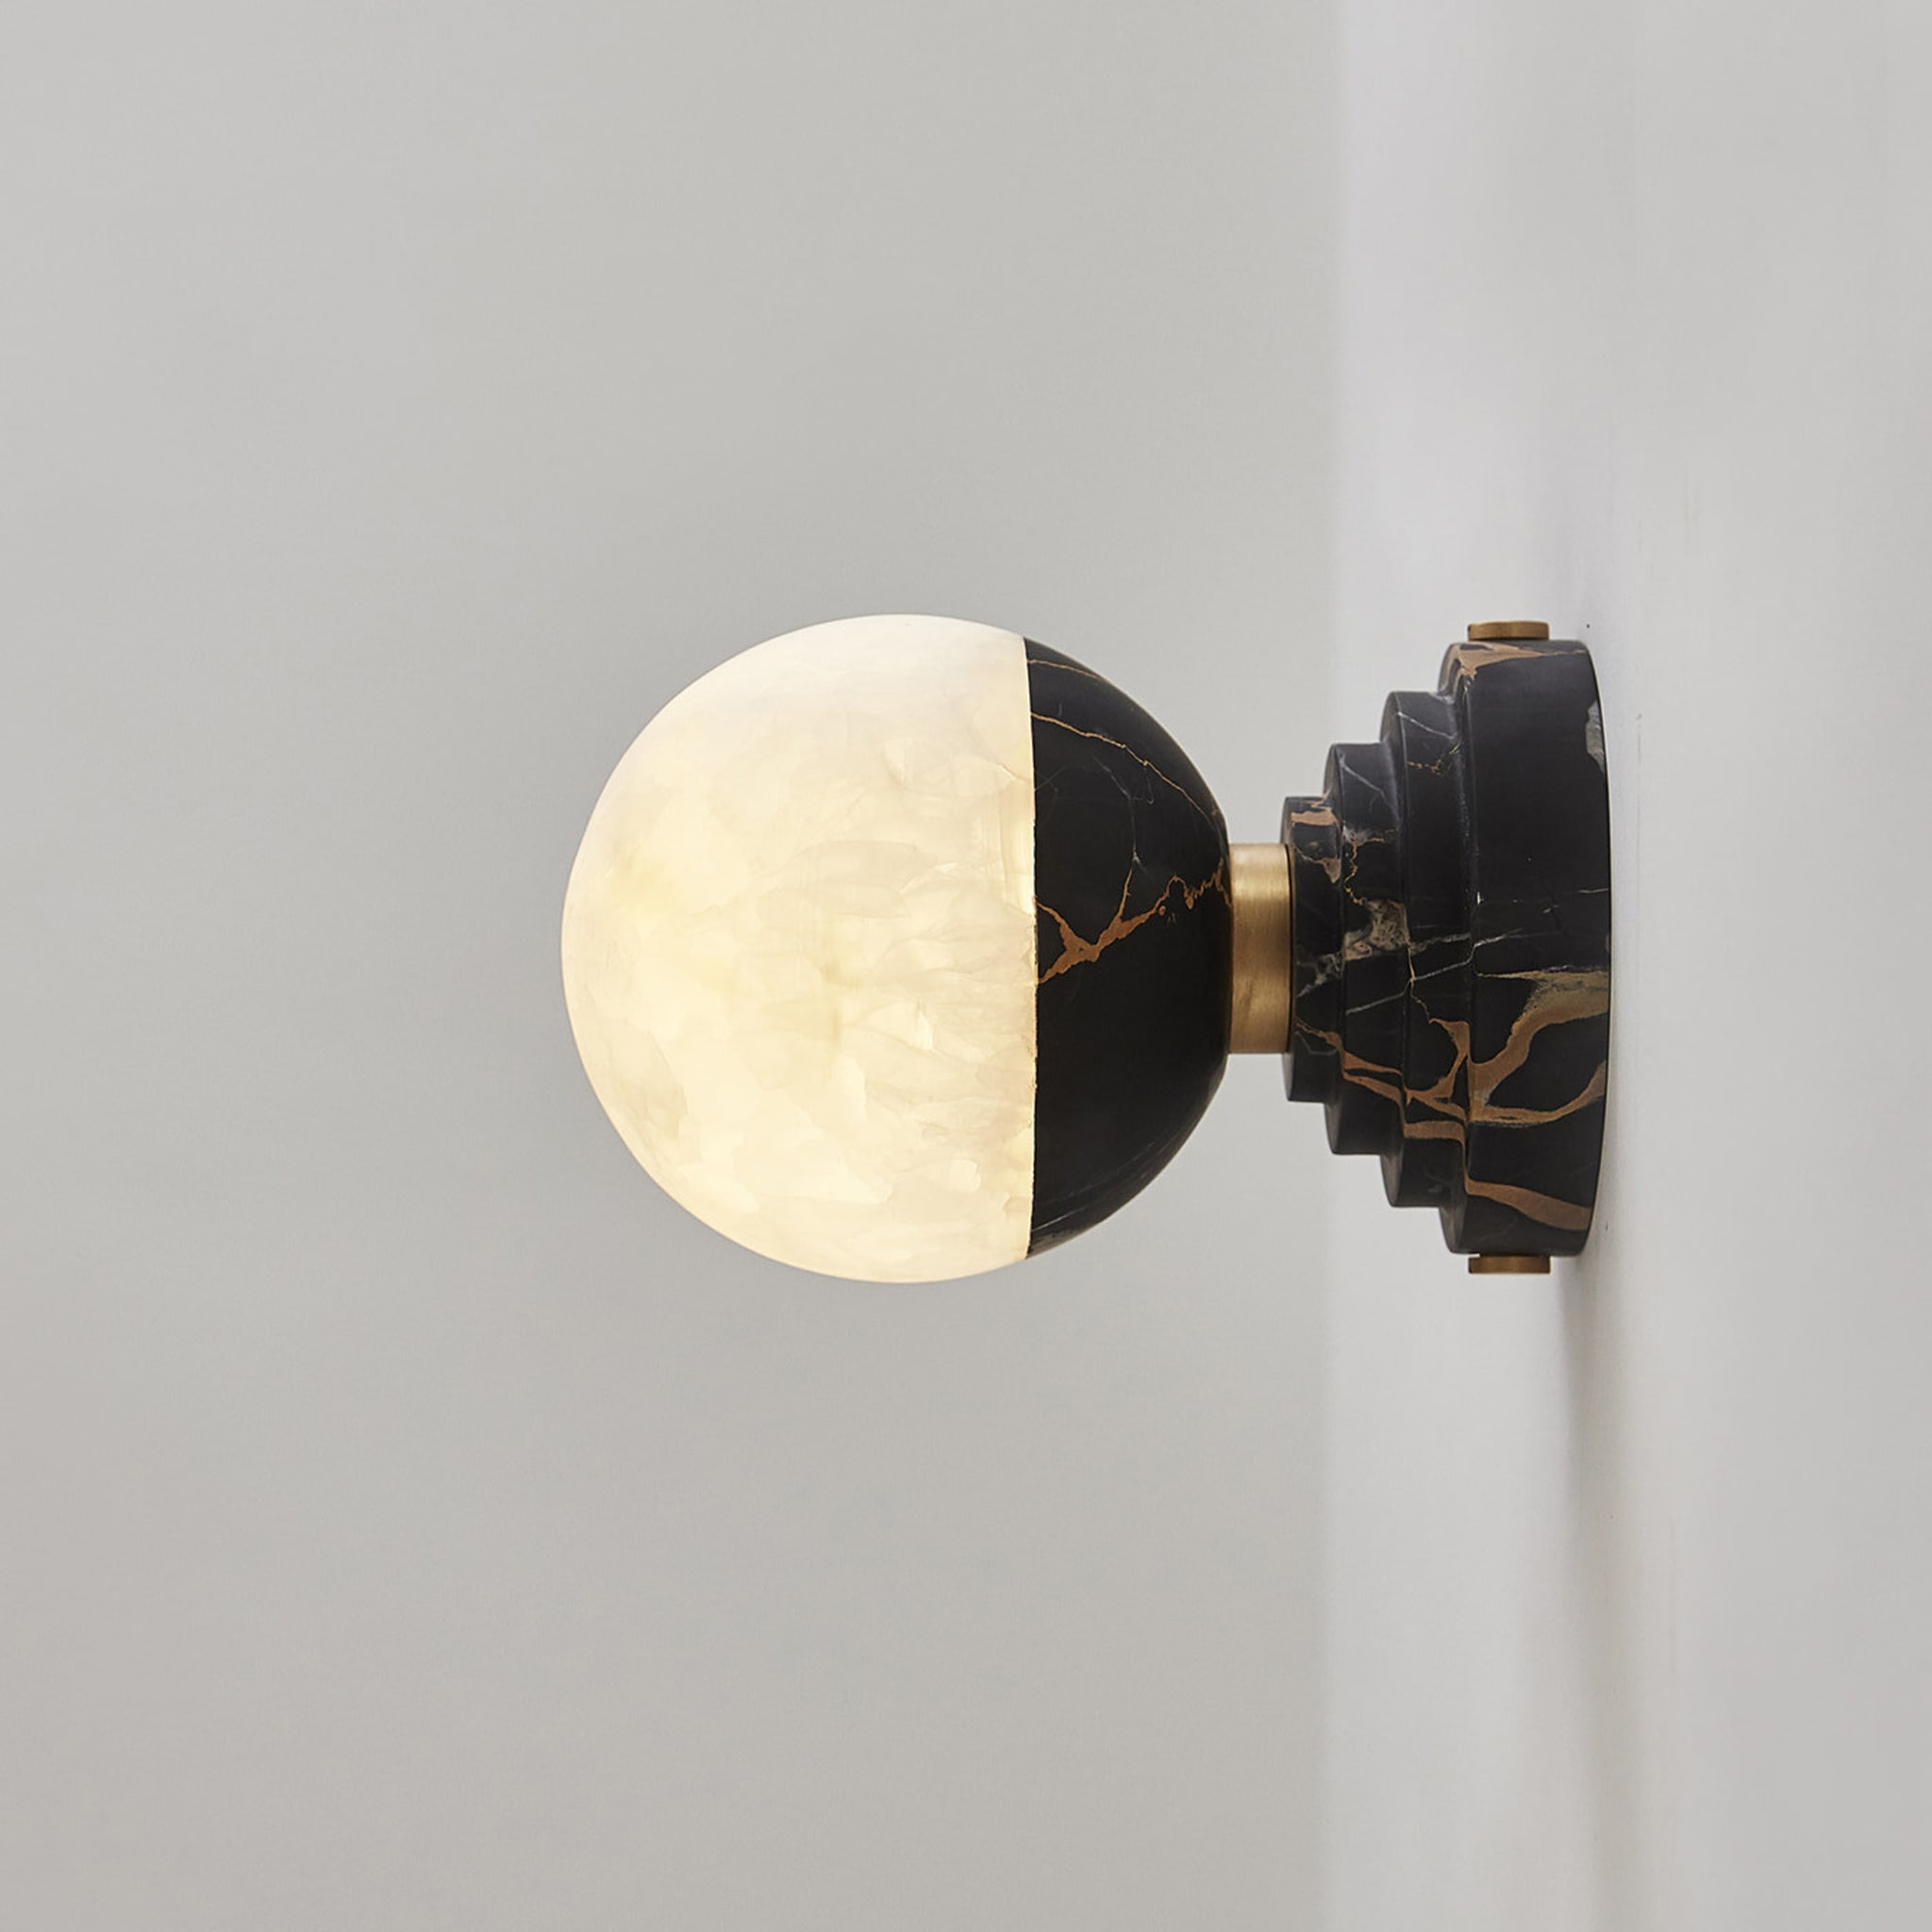 Lunar Sconce in Portoro Marble and Onyx  - Alternative view 1